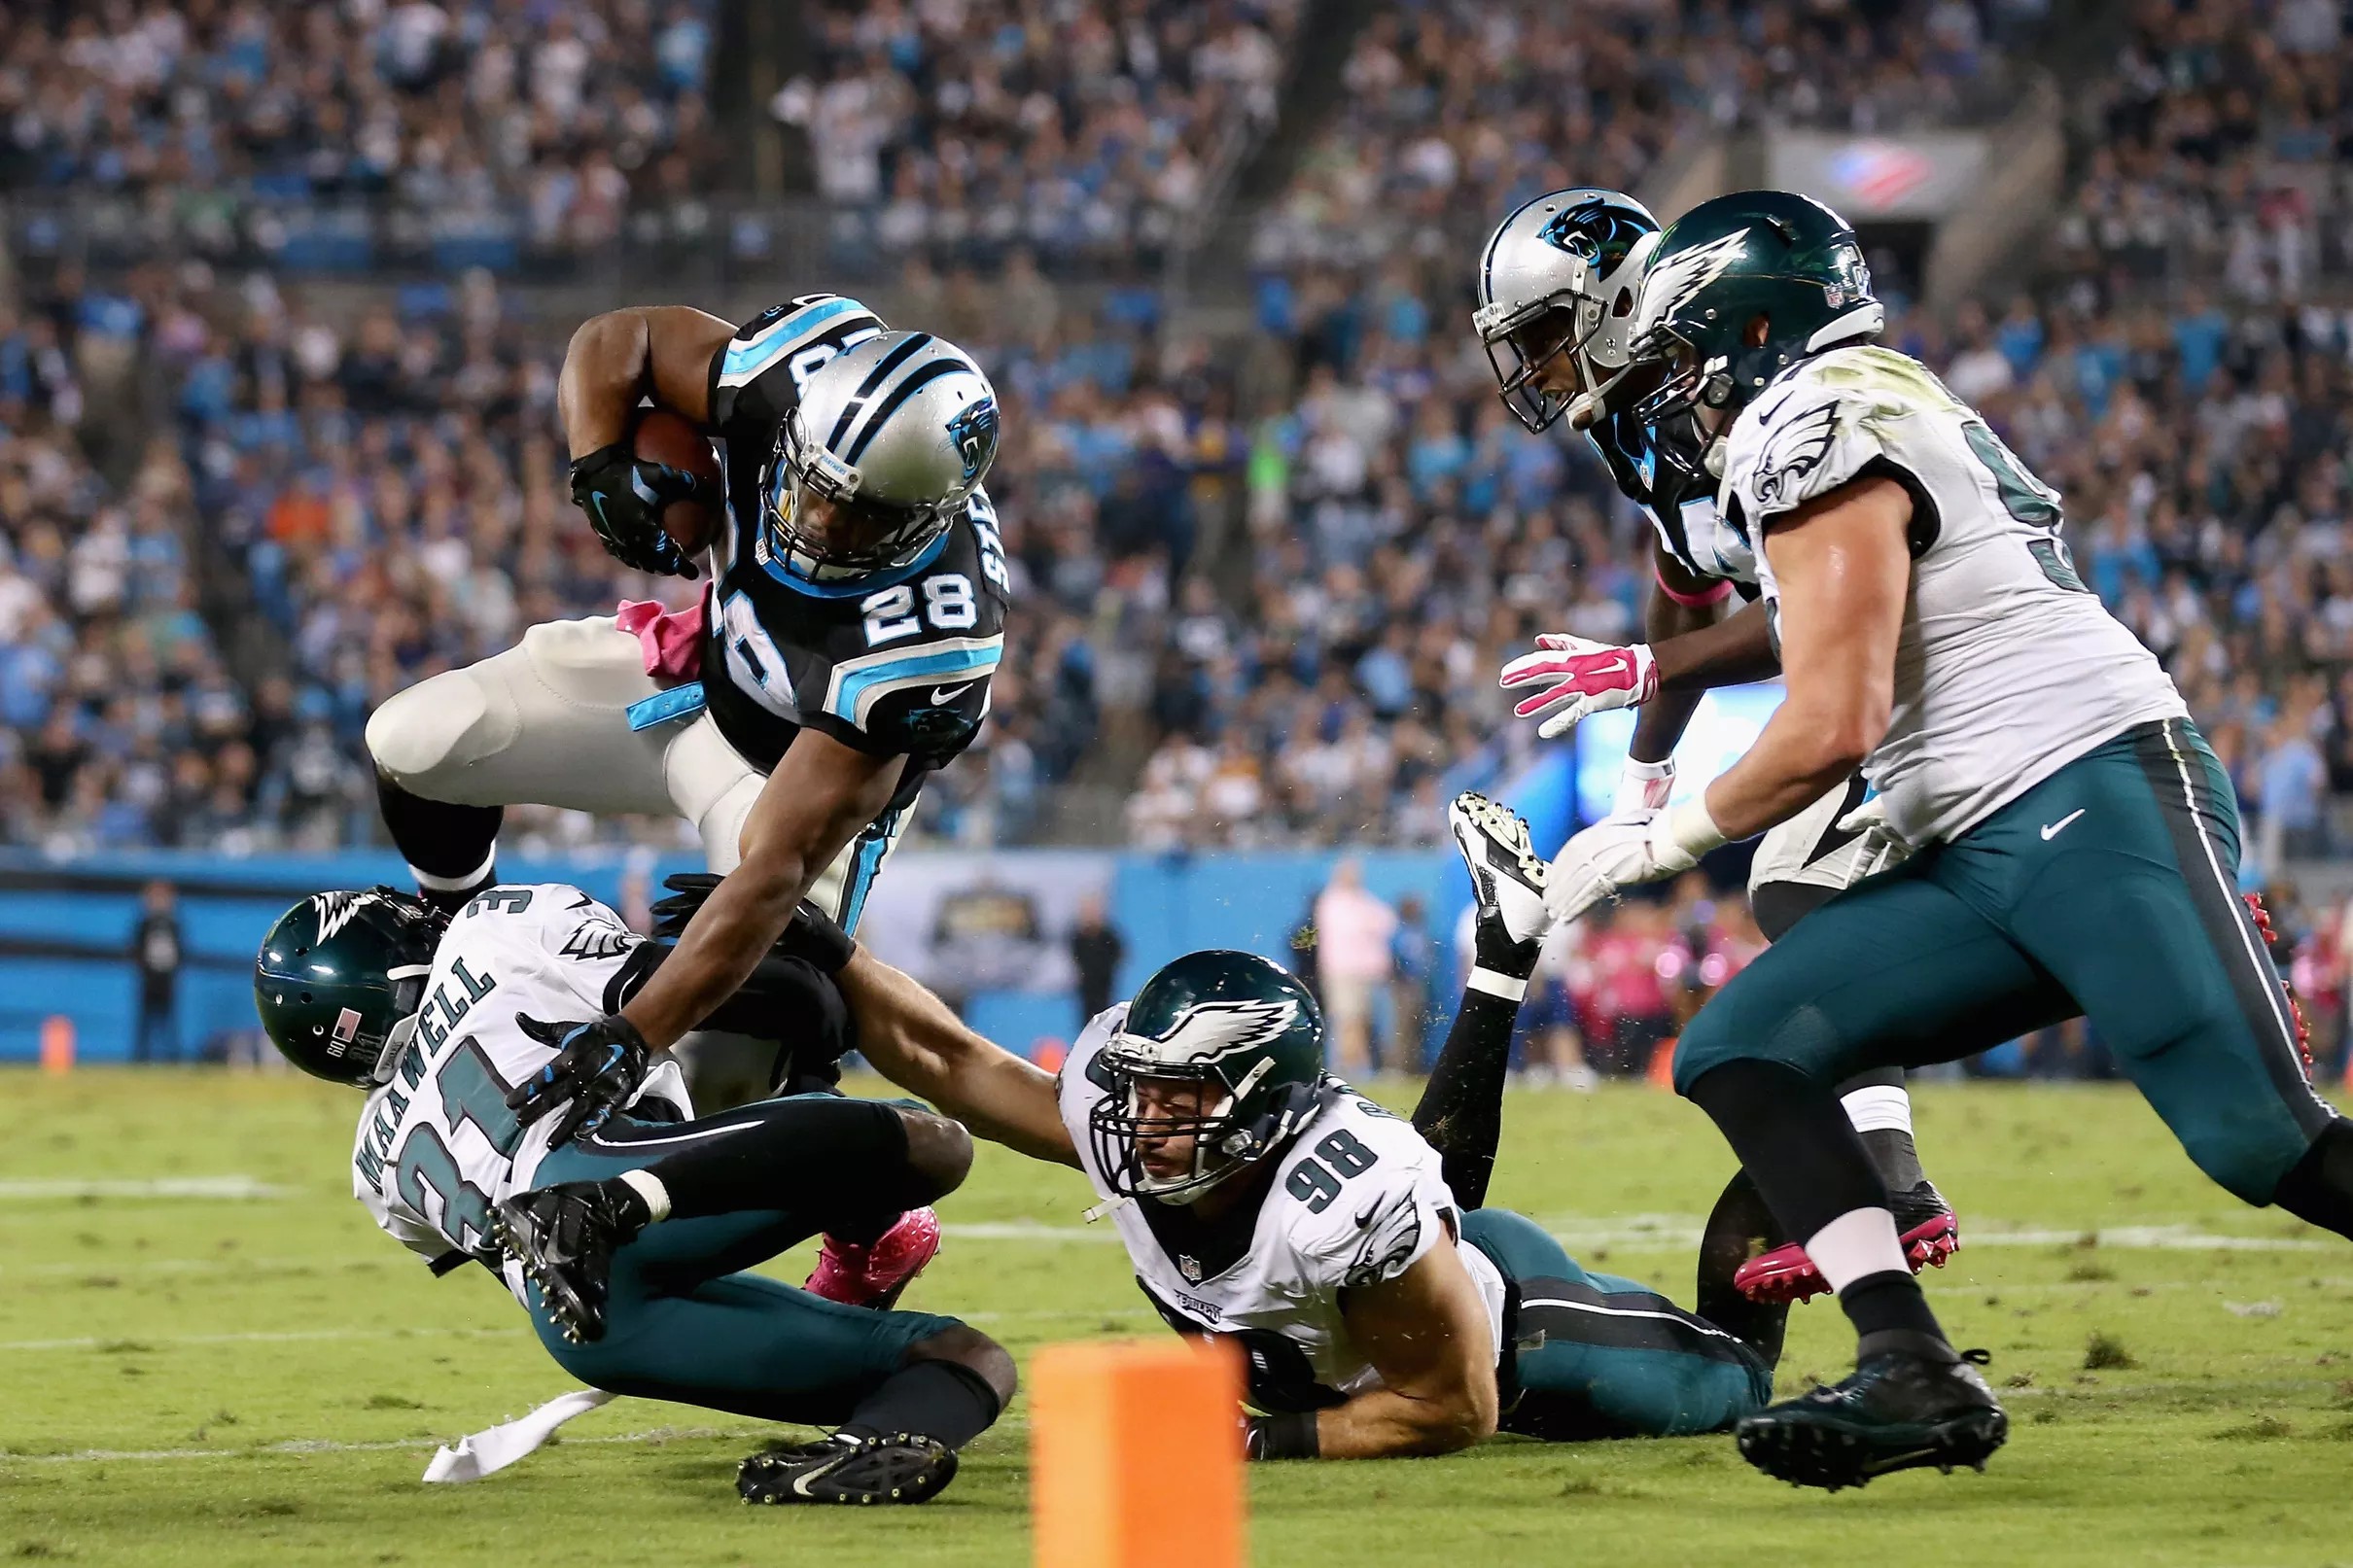 Panthers vs Eagles Key Matchups Injuries could sway the game Thursday